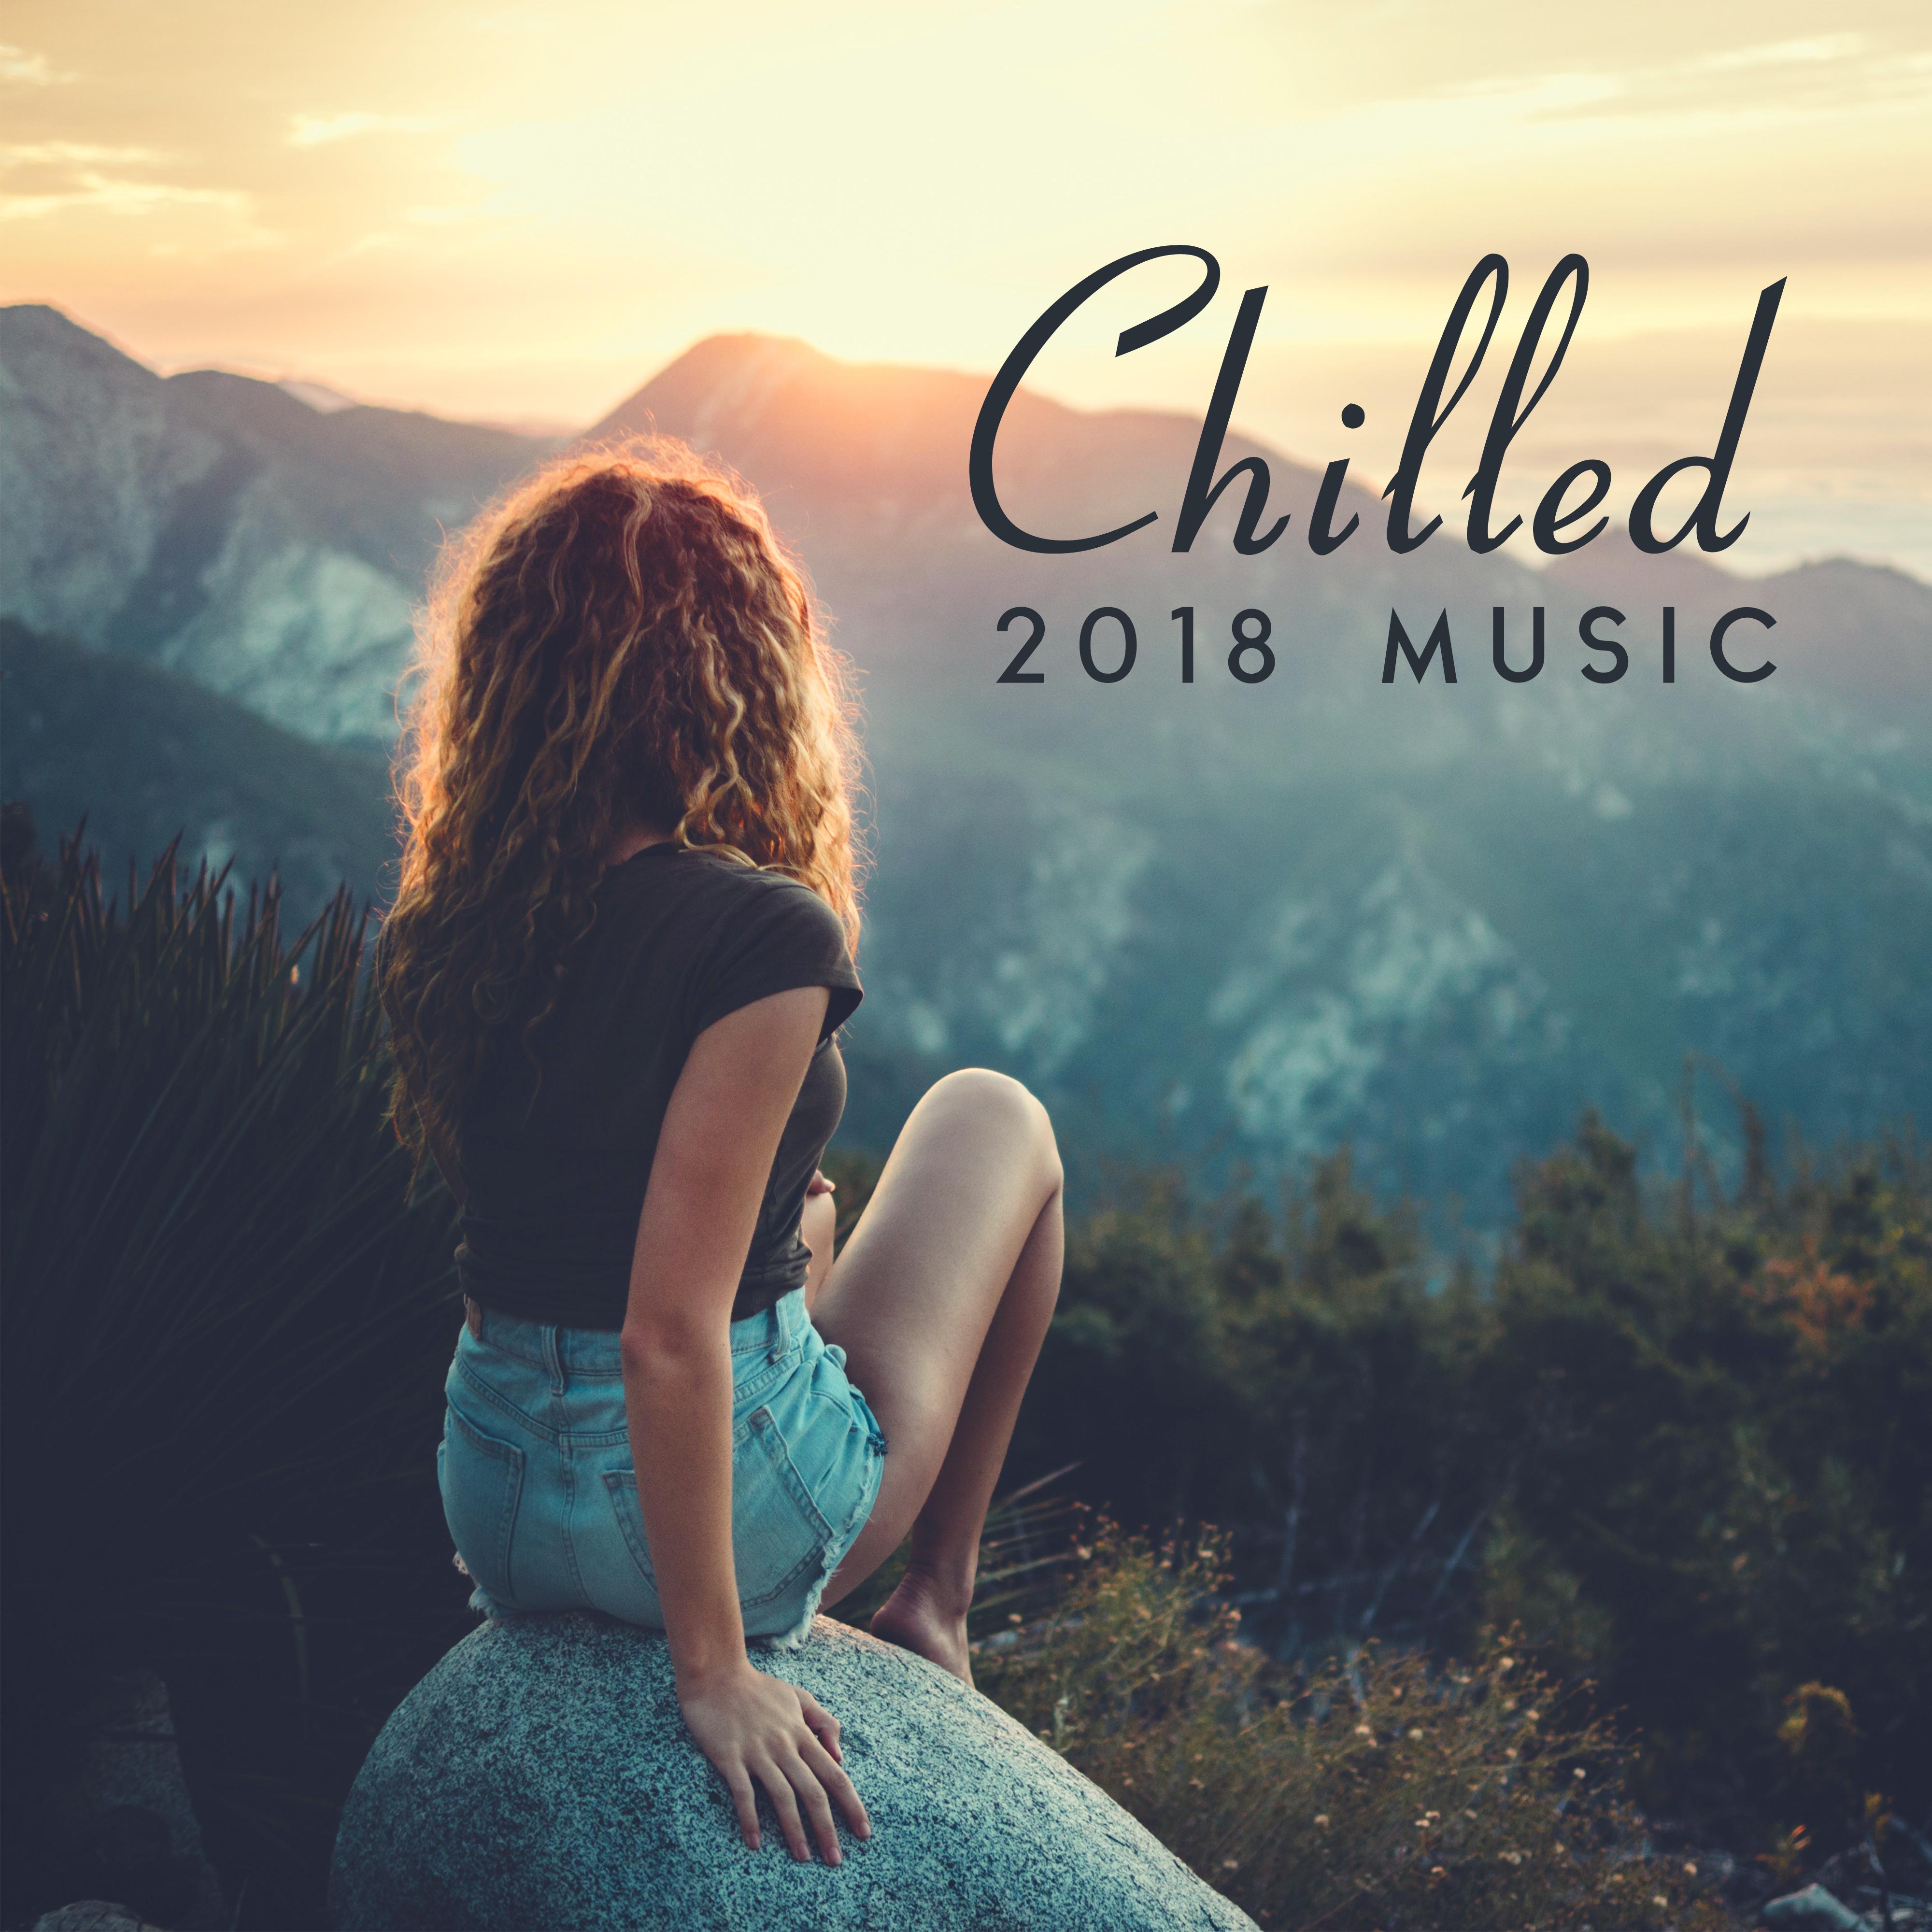 Chilled 2018 Music